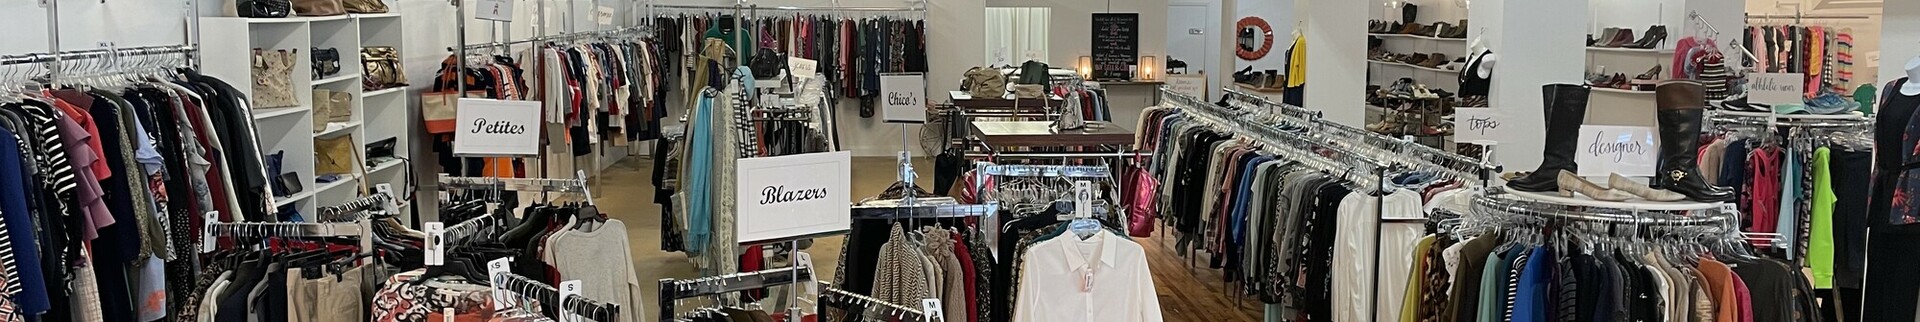 Fringe Consignment's banner image.